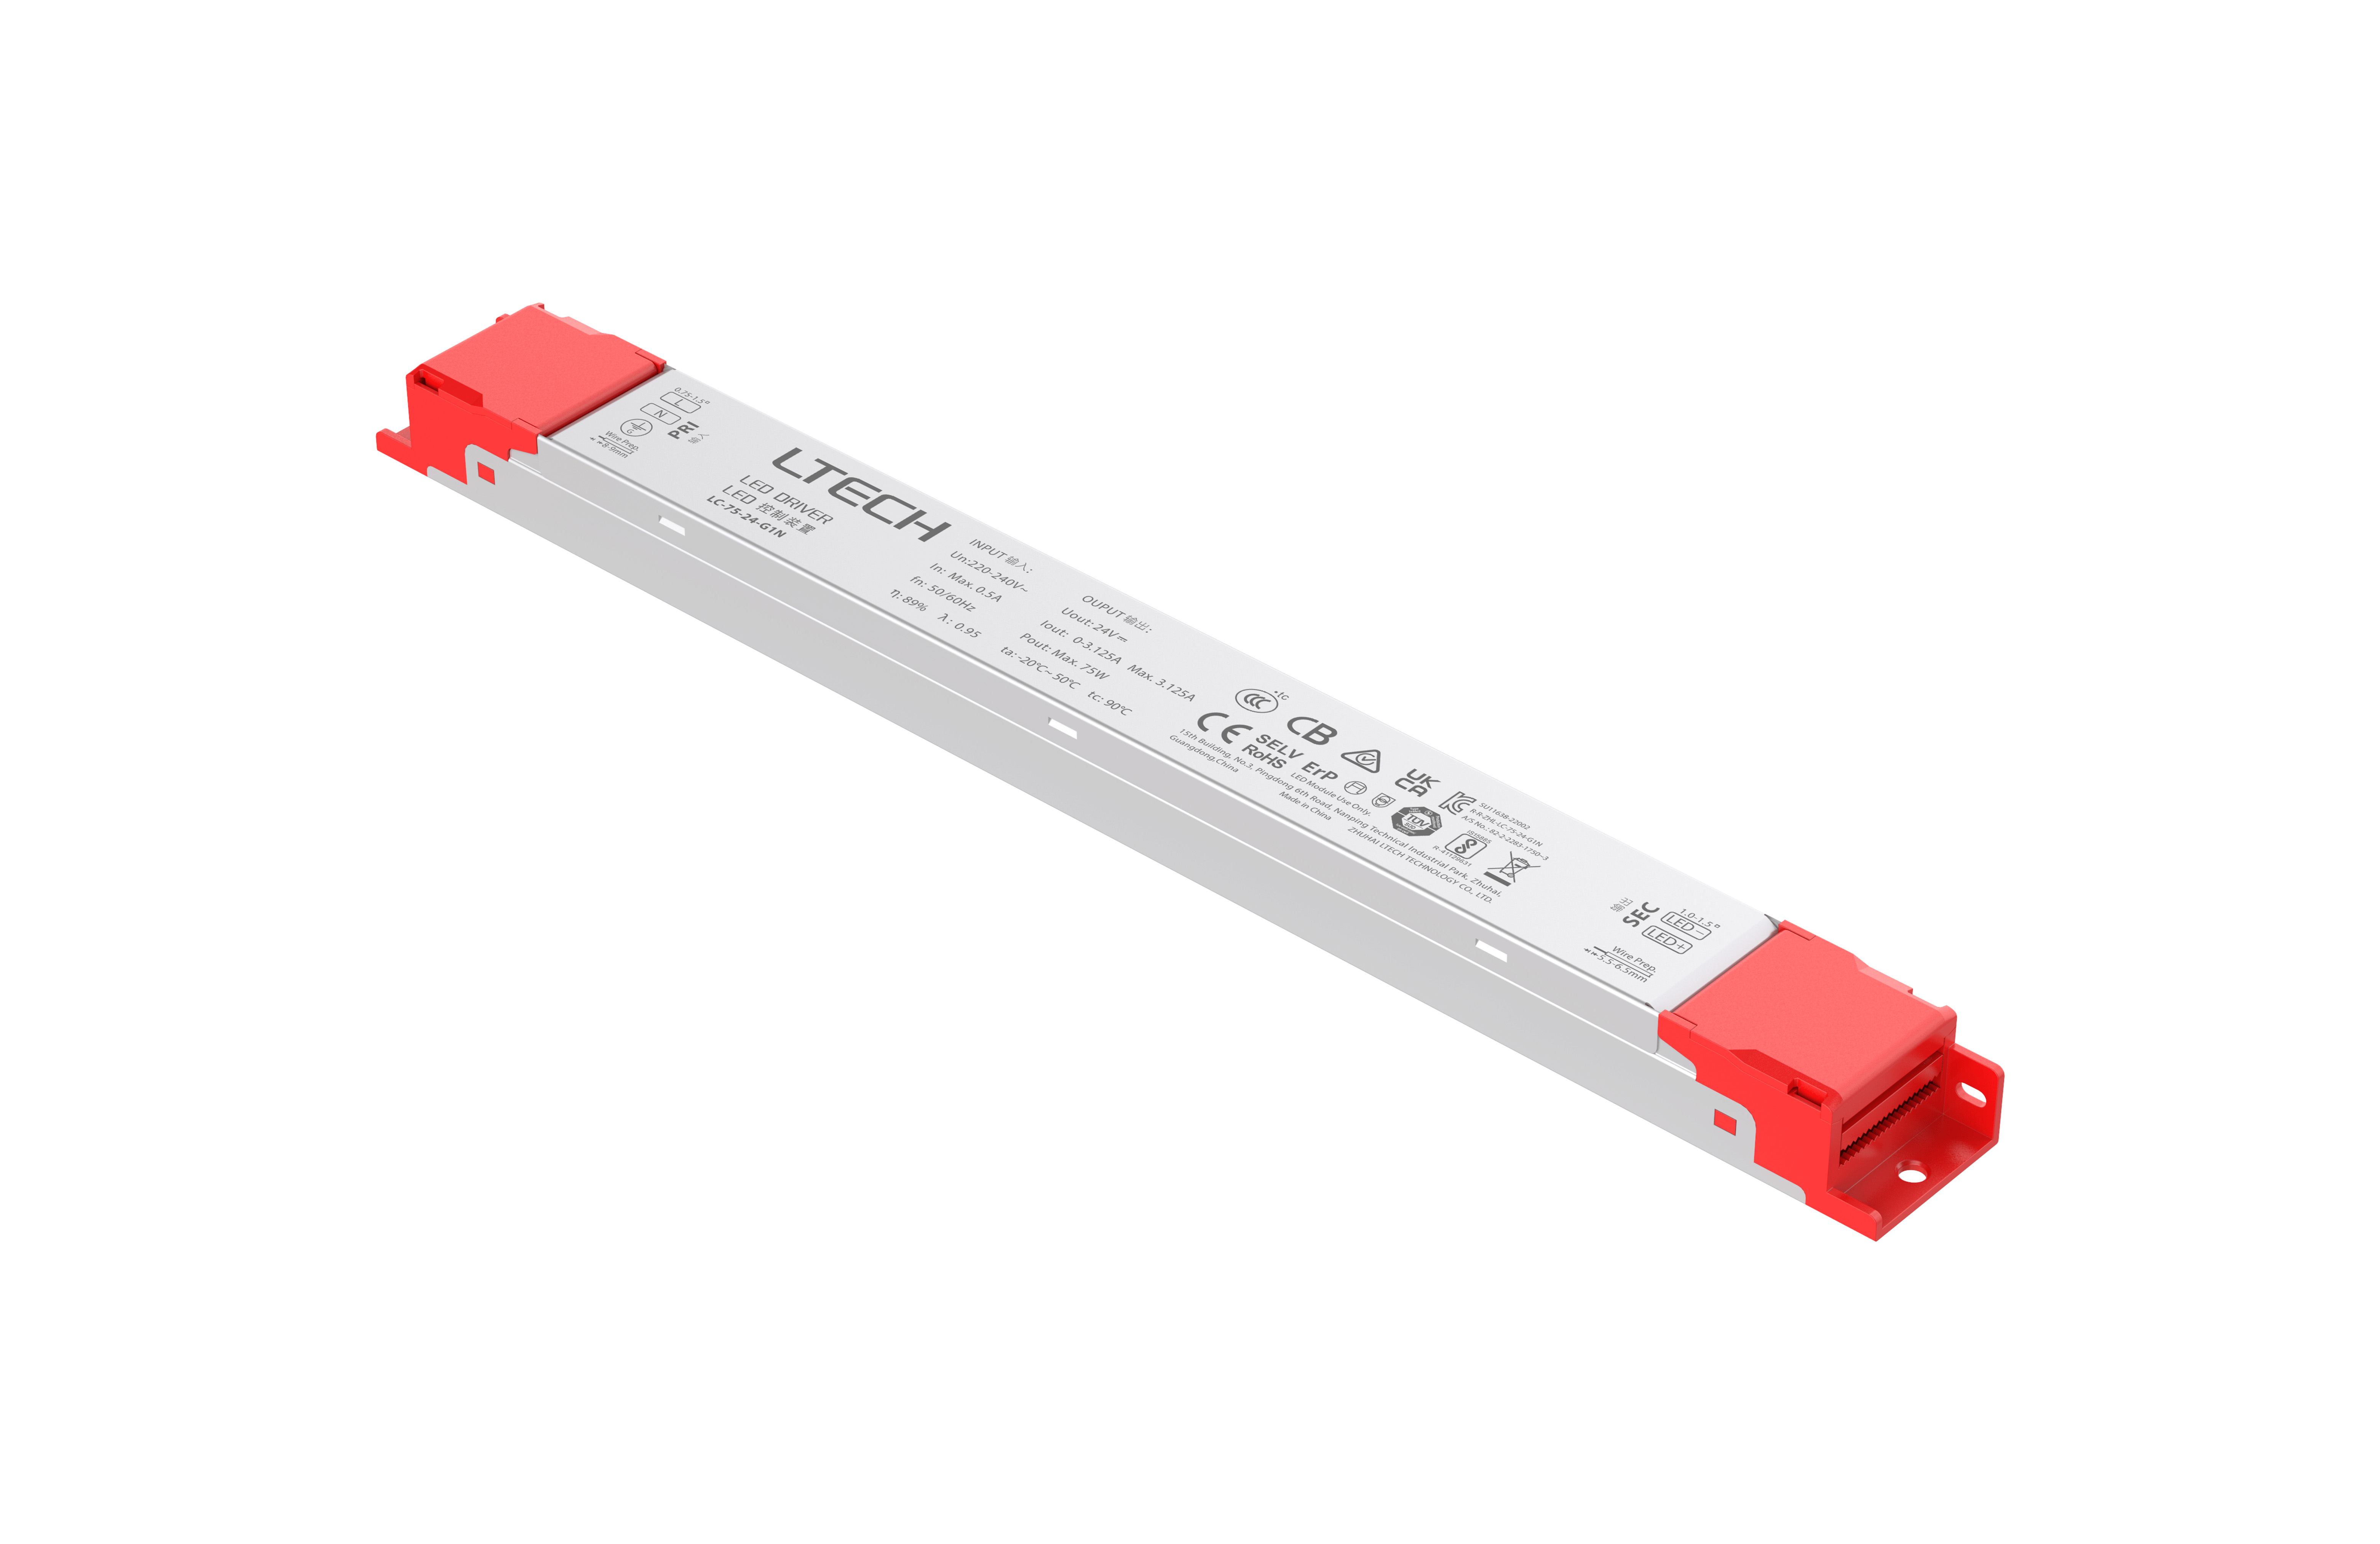 LC-75-24-G1N  Intelligent Constant Voltage  LED Driver; ON/OFF; 75W; 24VDC 3.125A ; 220-240Vac; IP20; 5yrs Warrenty.